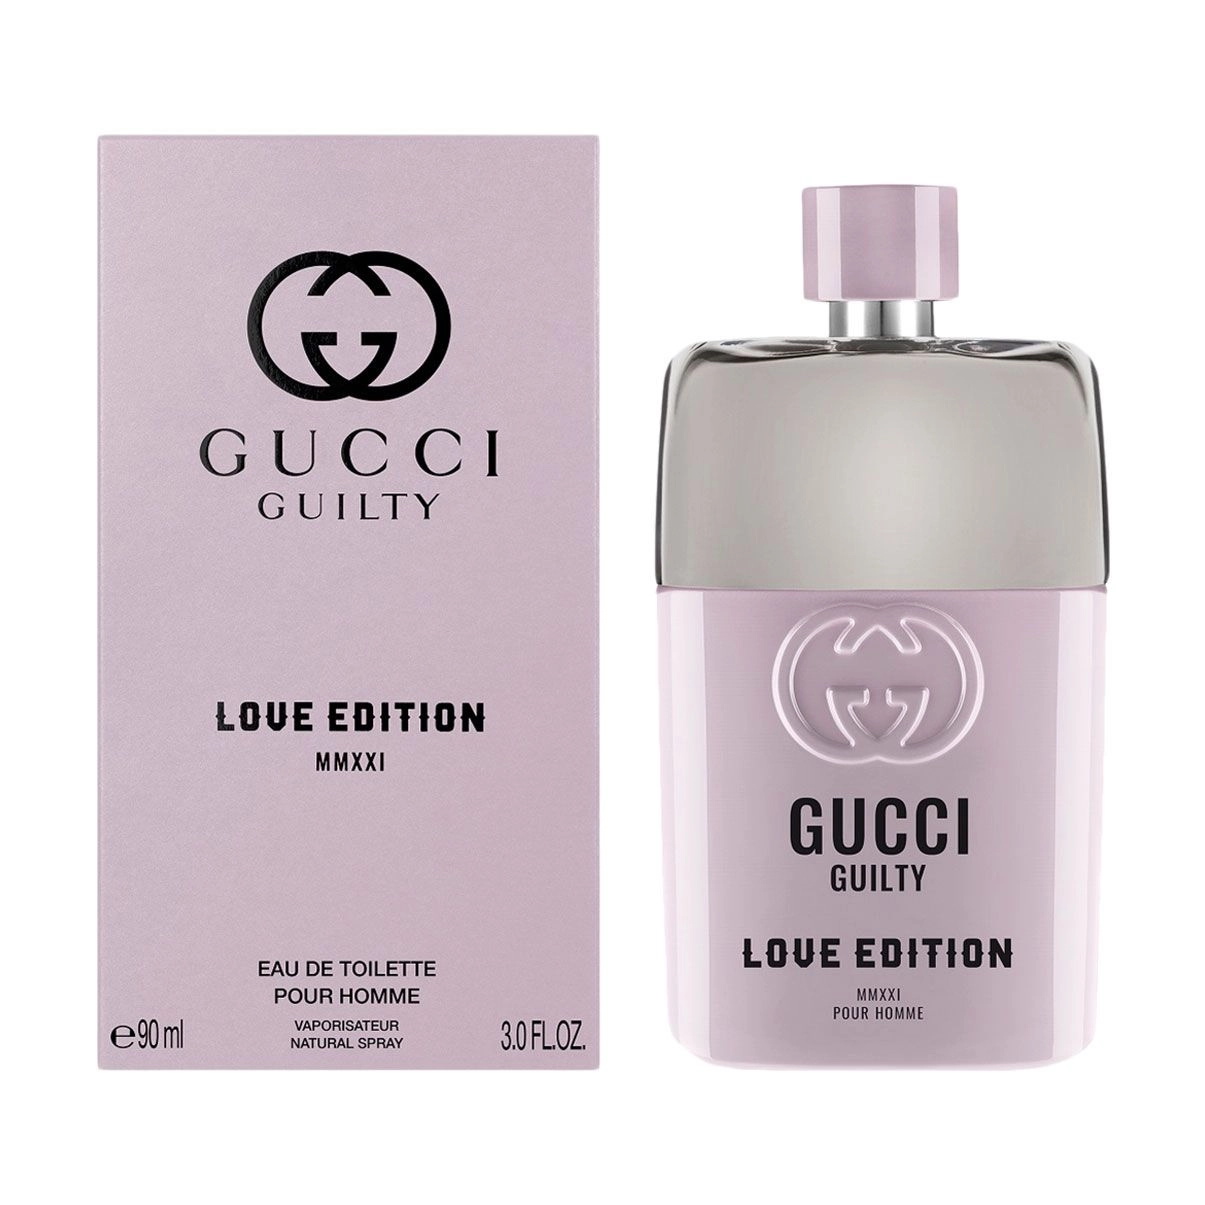 Gucci Guilty Love Edition MMXXI Pour Homme Туалетная вода мужская, 90 мл - фото N1